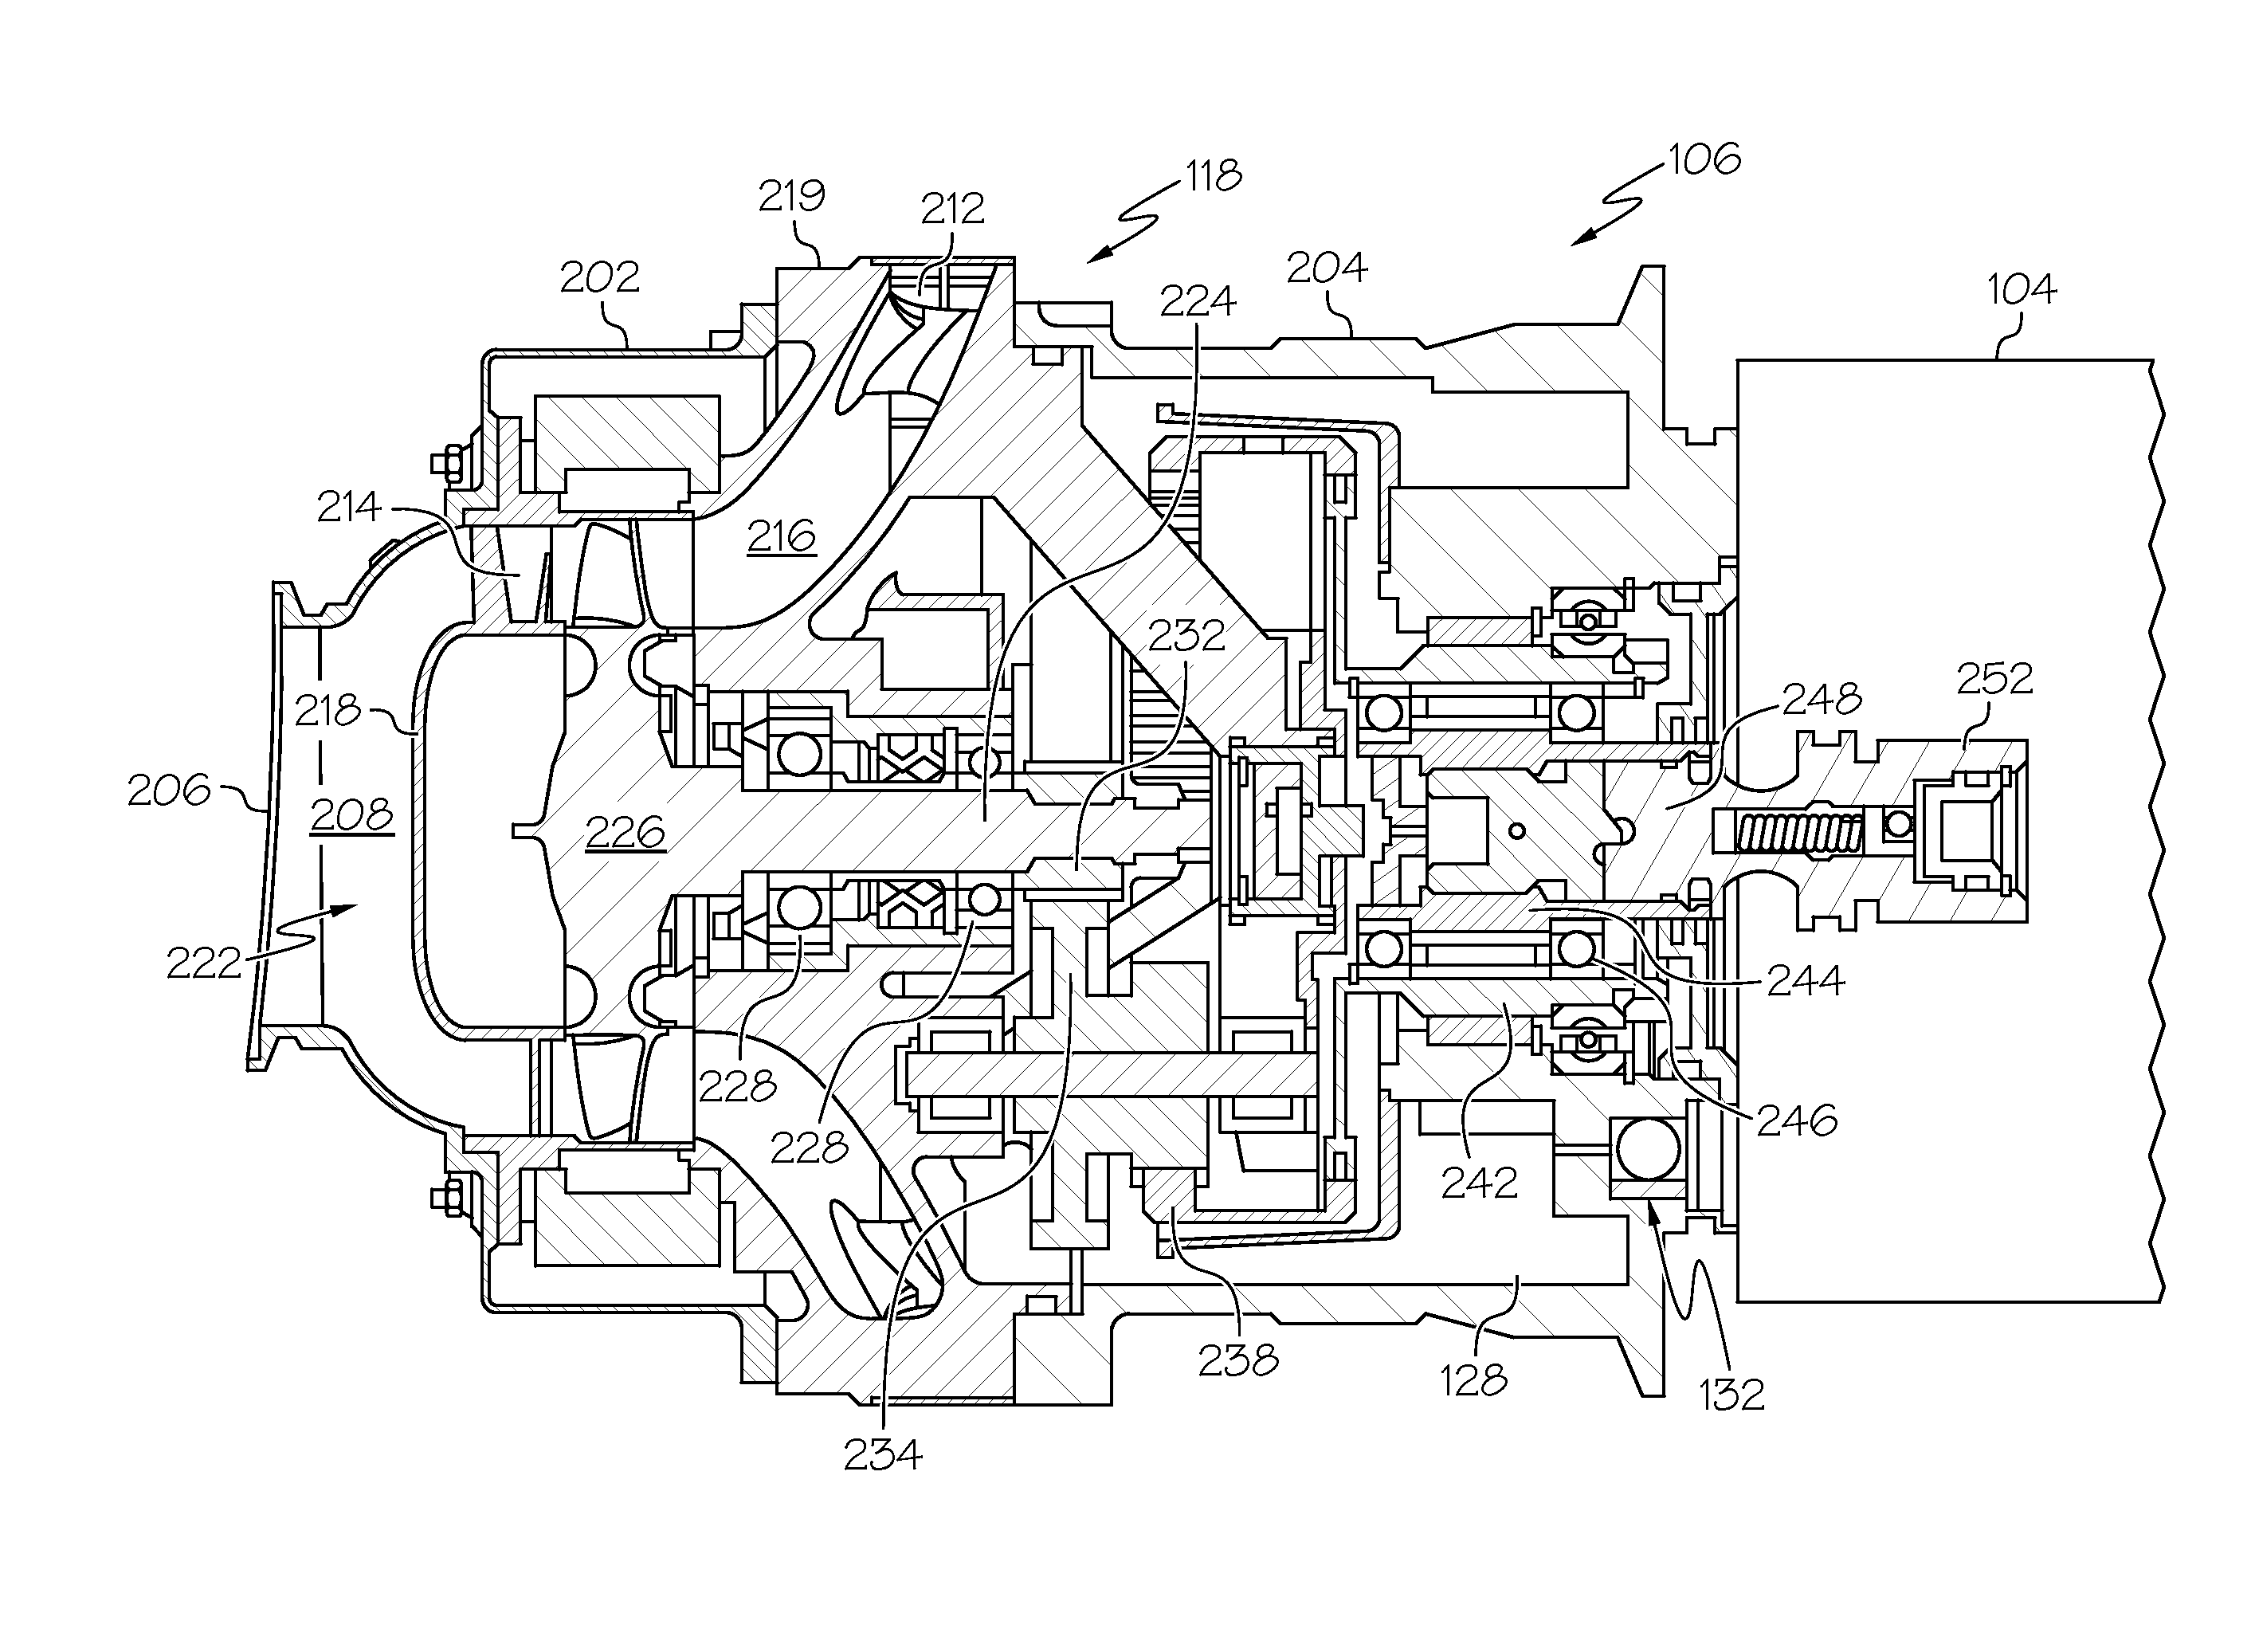 Air turbine starter including a lightweight, low differential pressure check valve